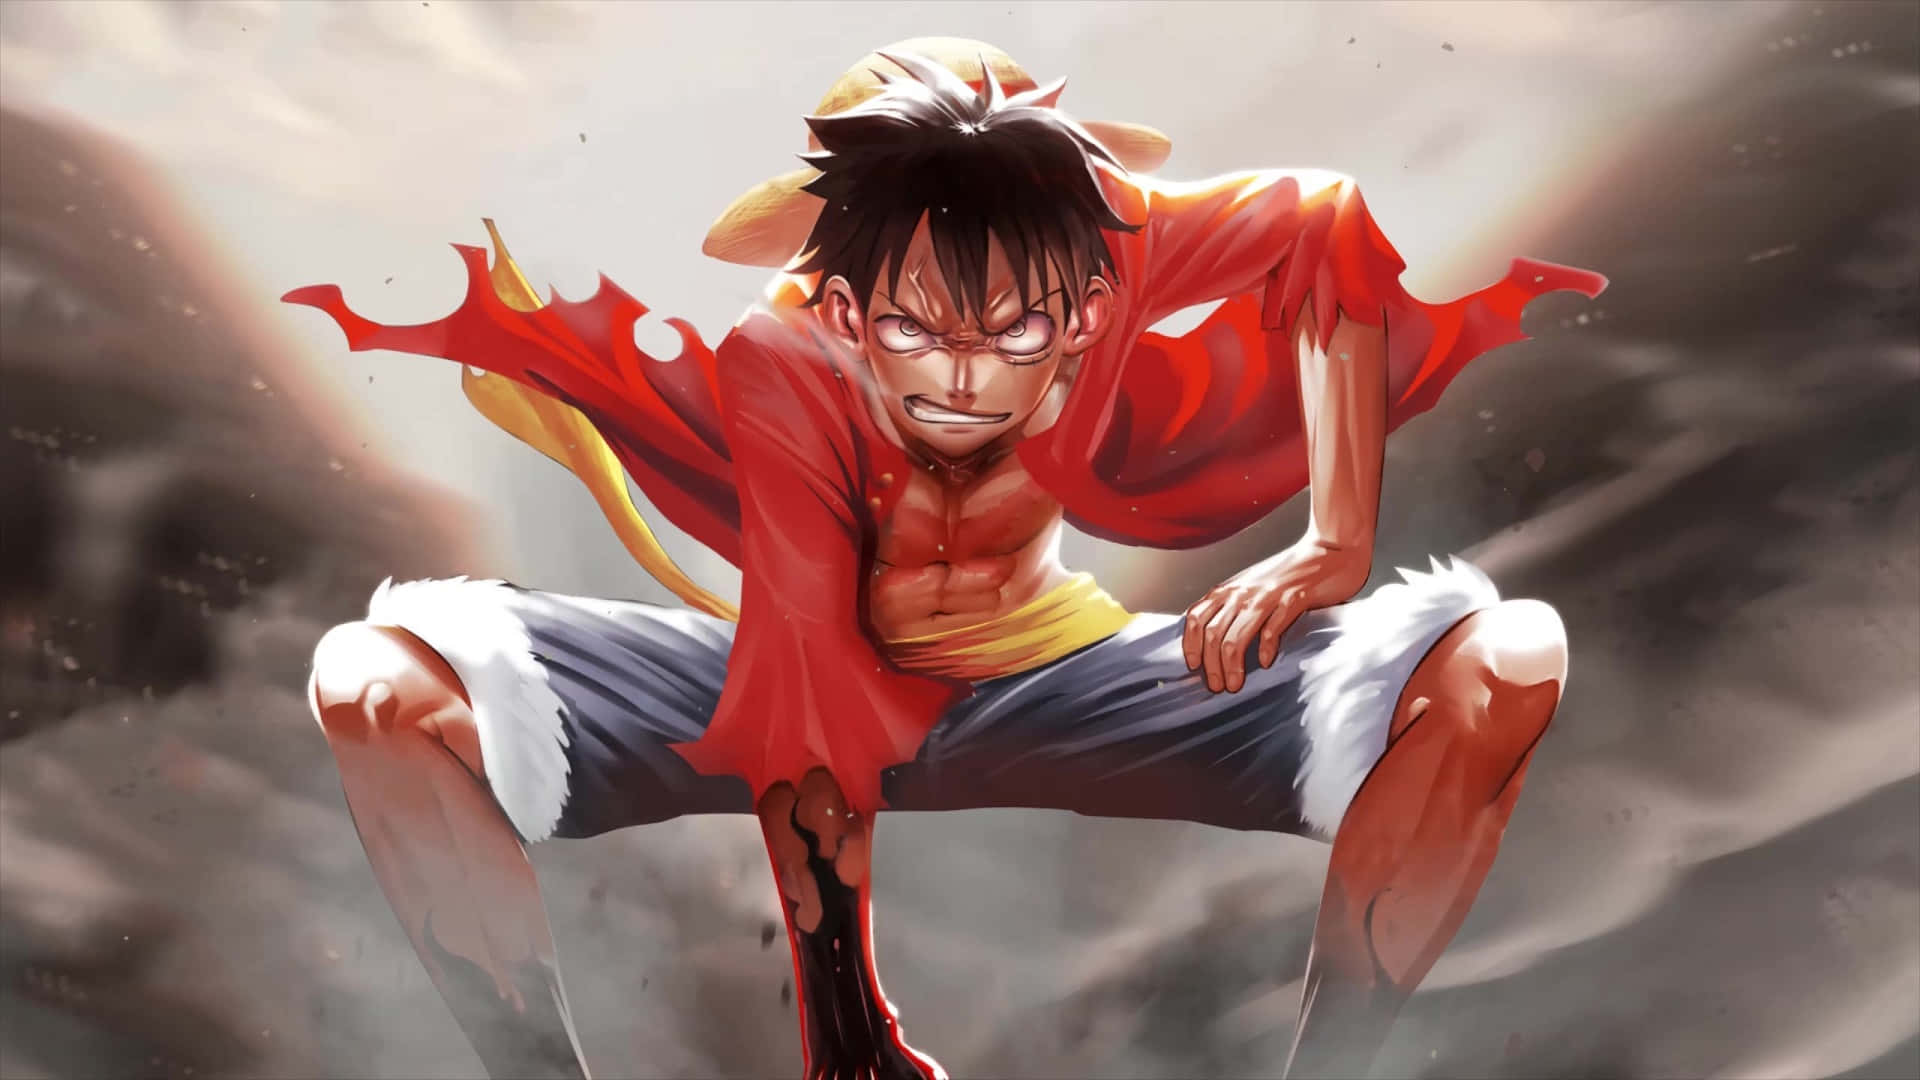 alyssa casey share images of luffy photos